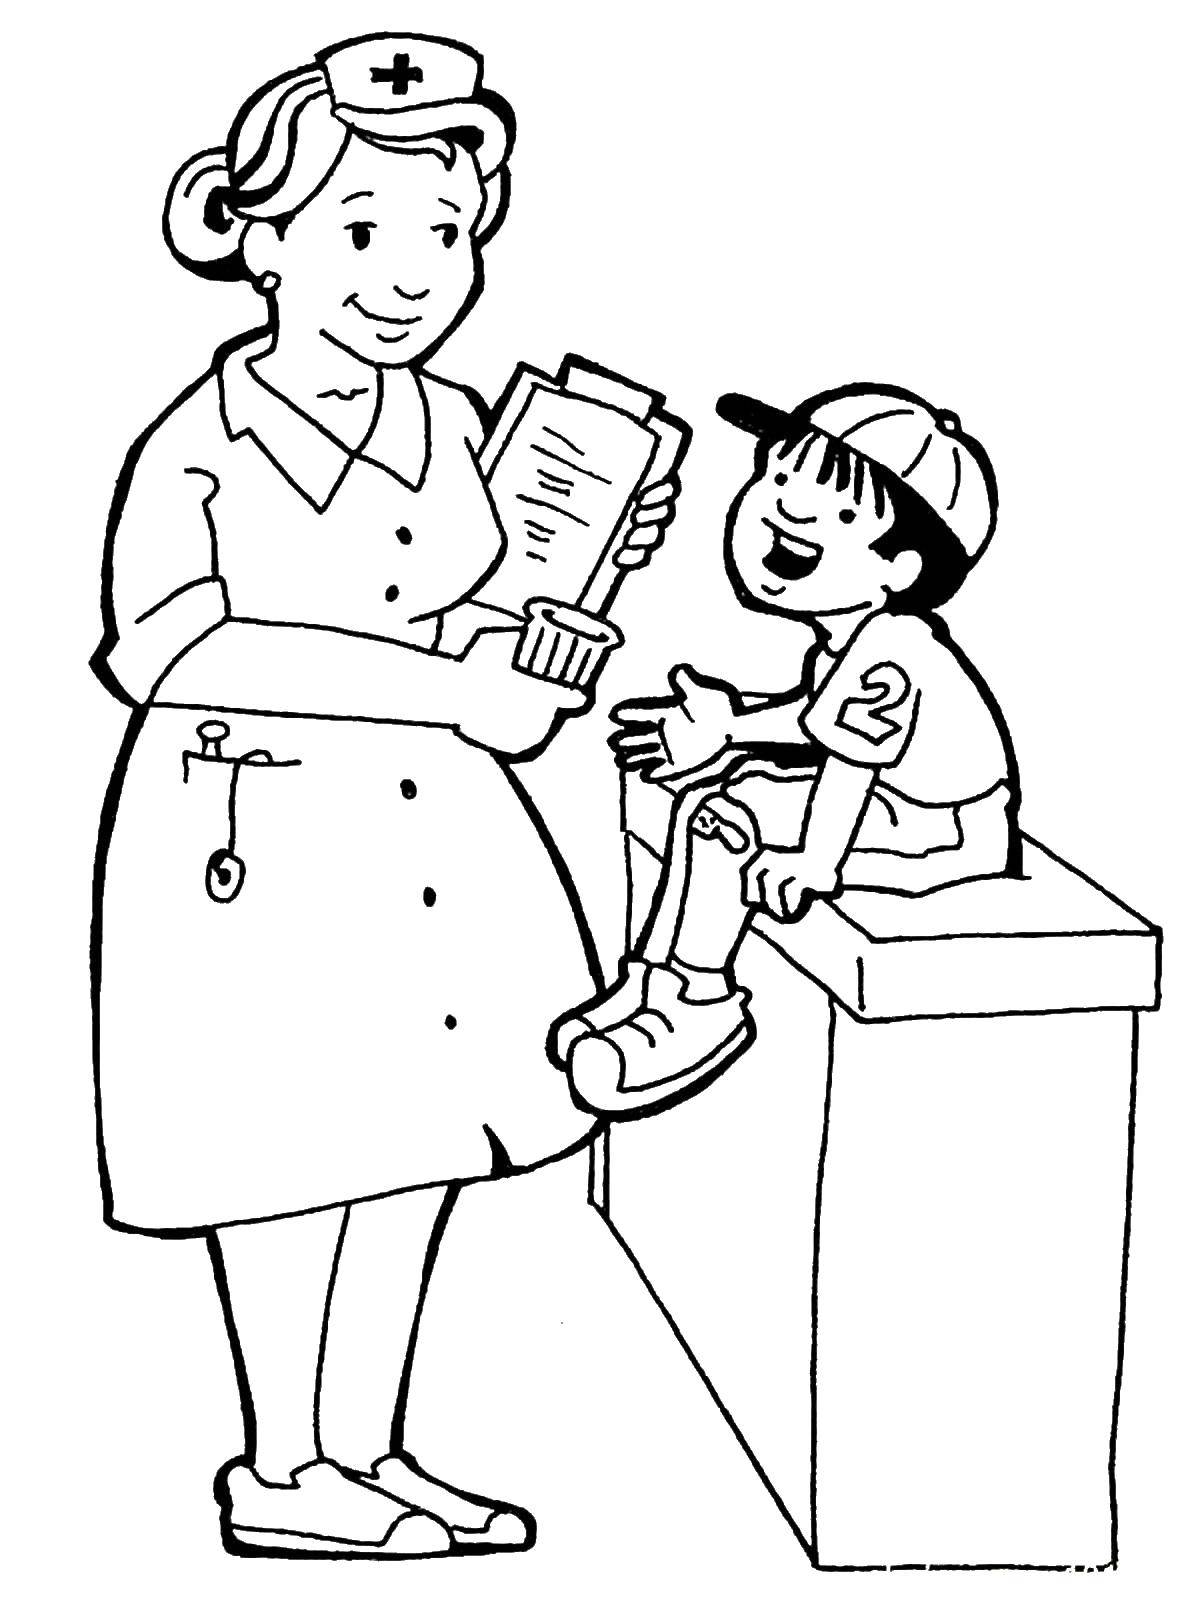 Coloring Nurse. Category a profession. Tags:  A profession.